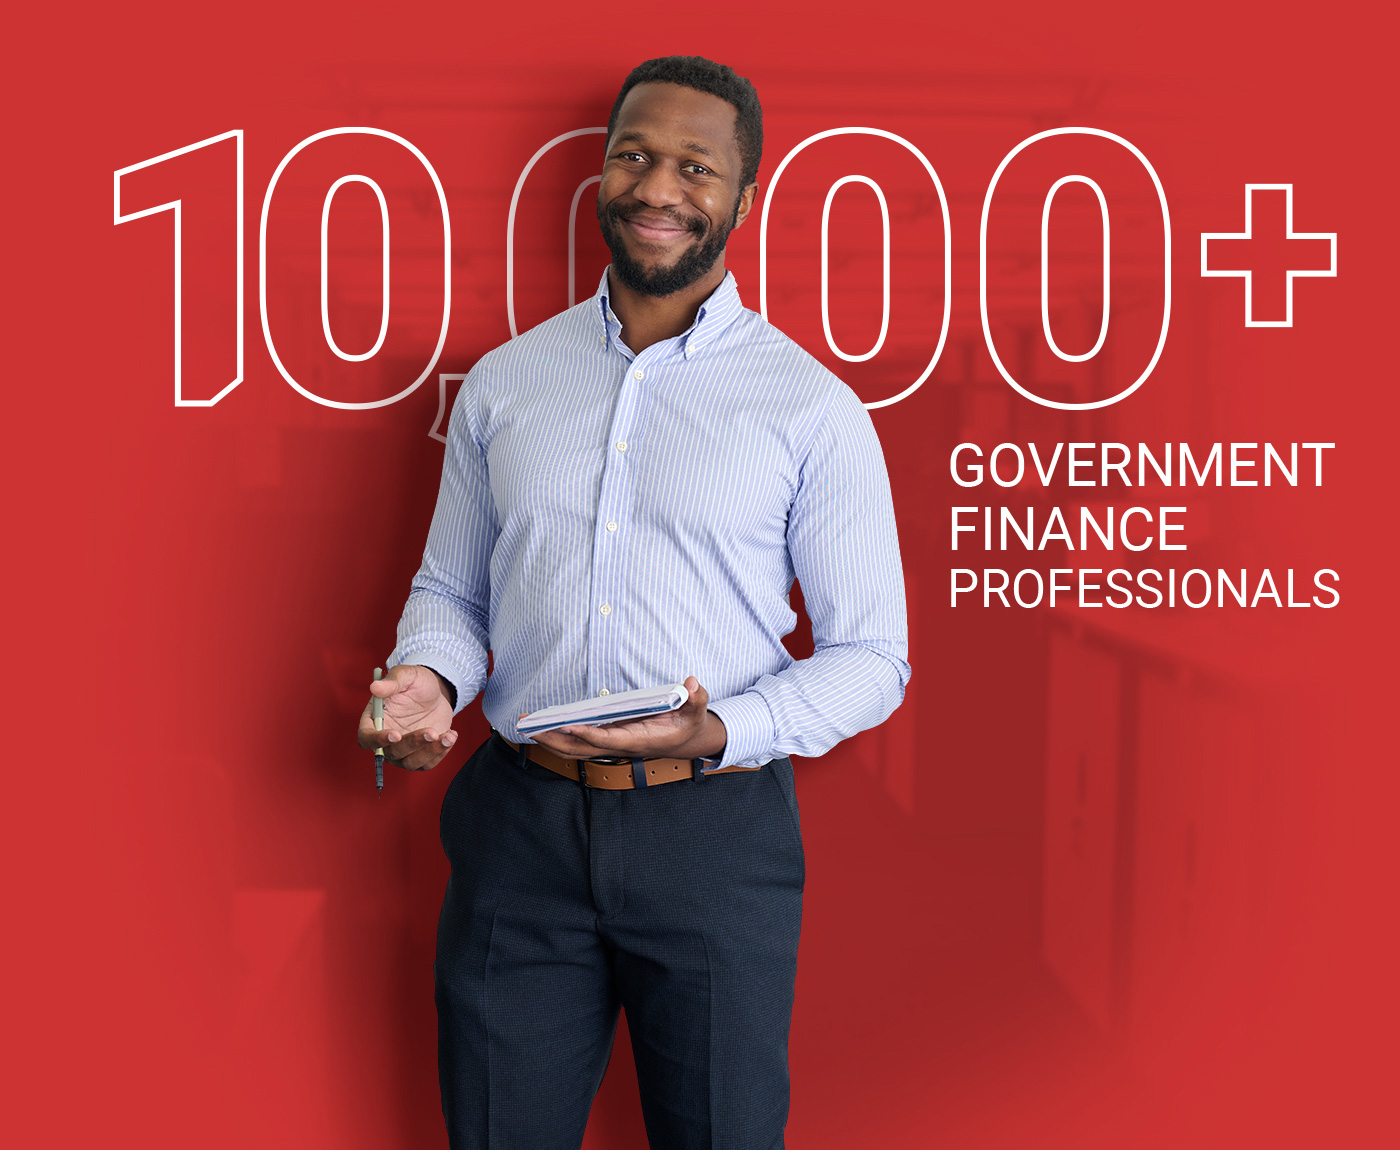 10,000+ government finance professionals